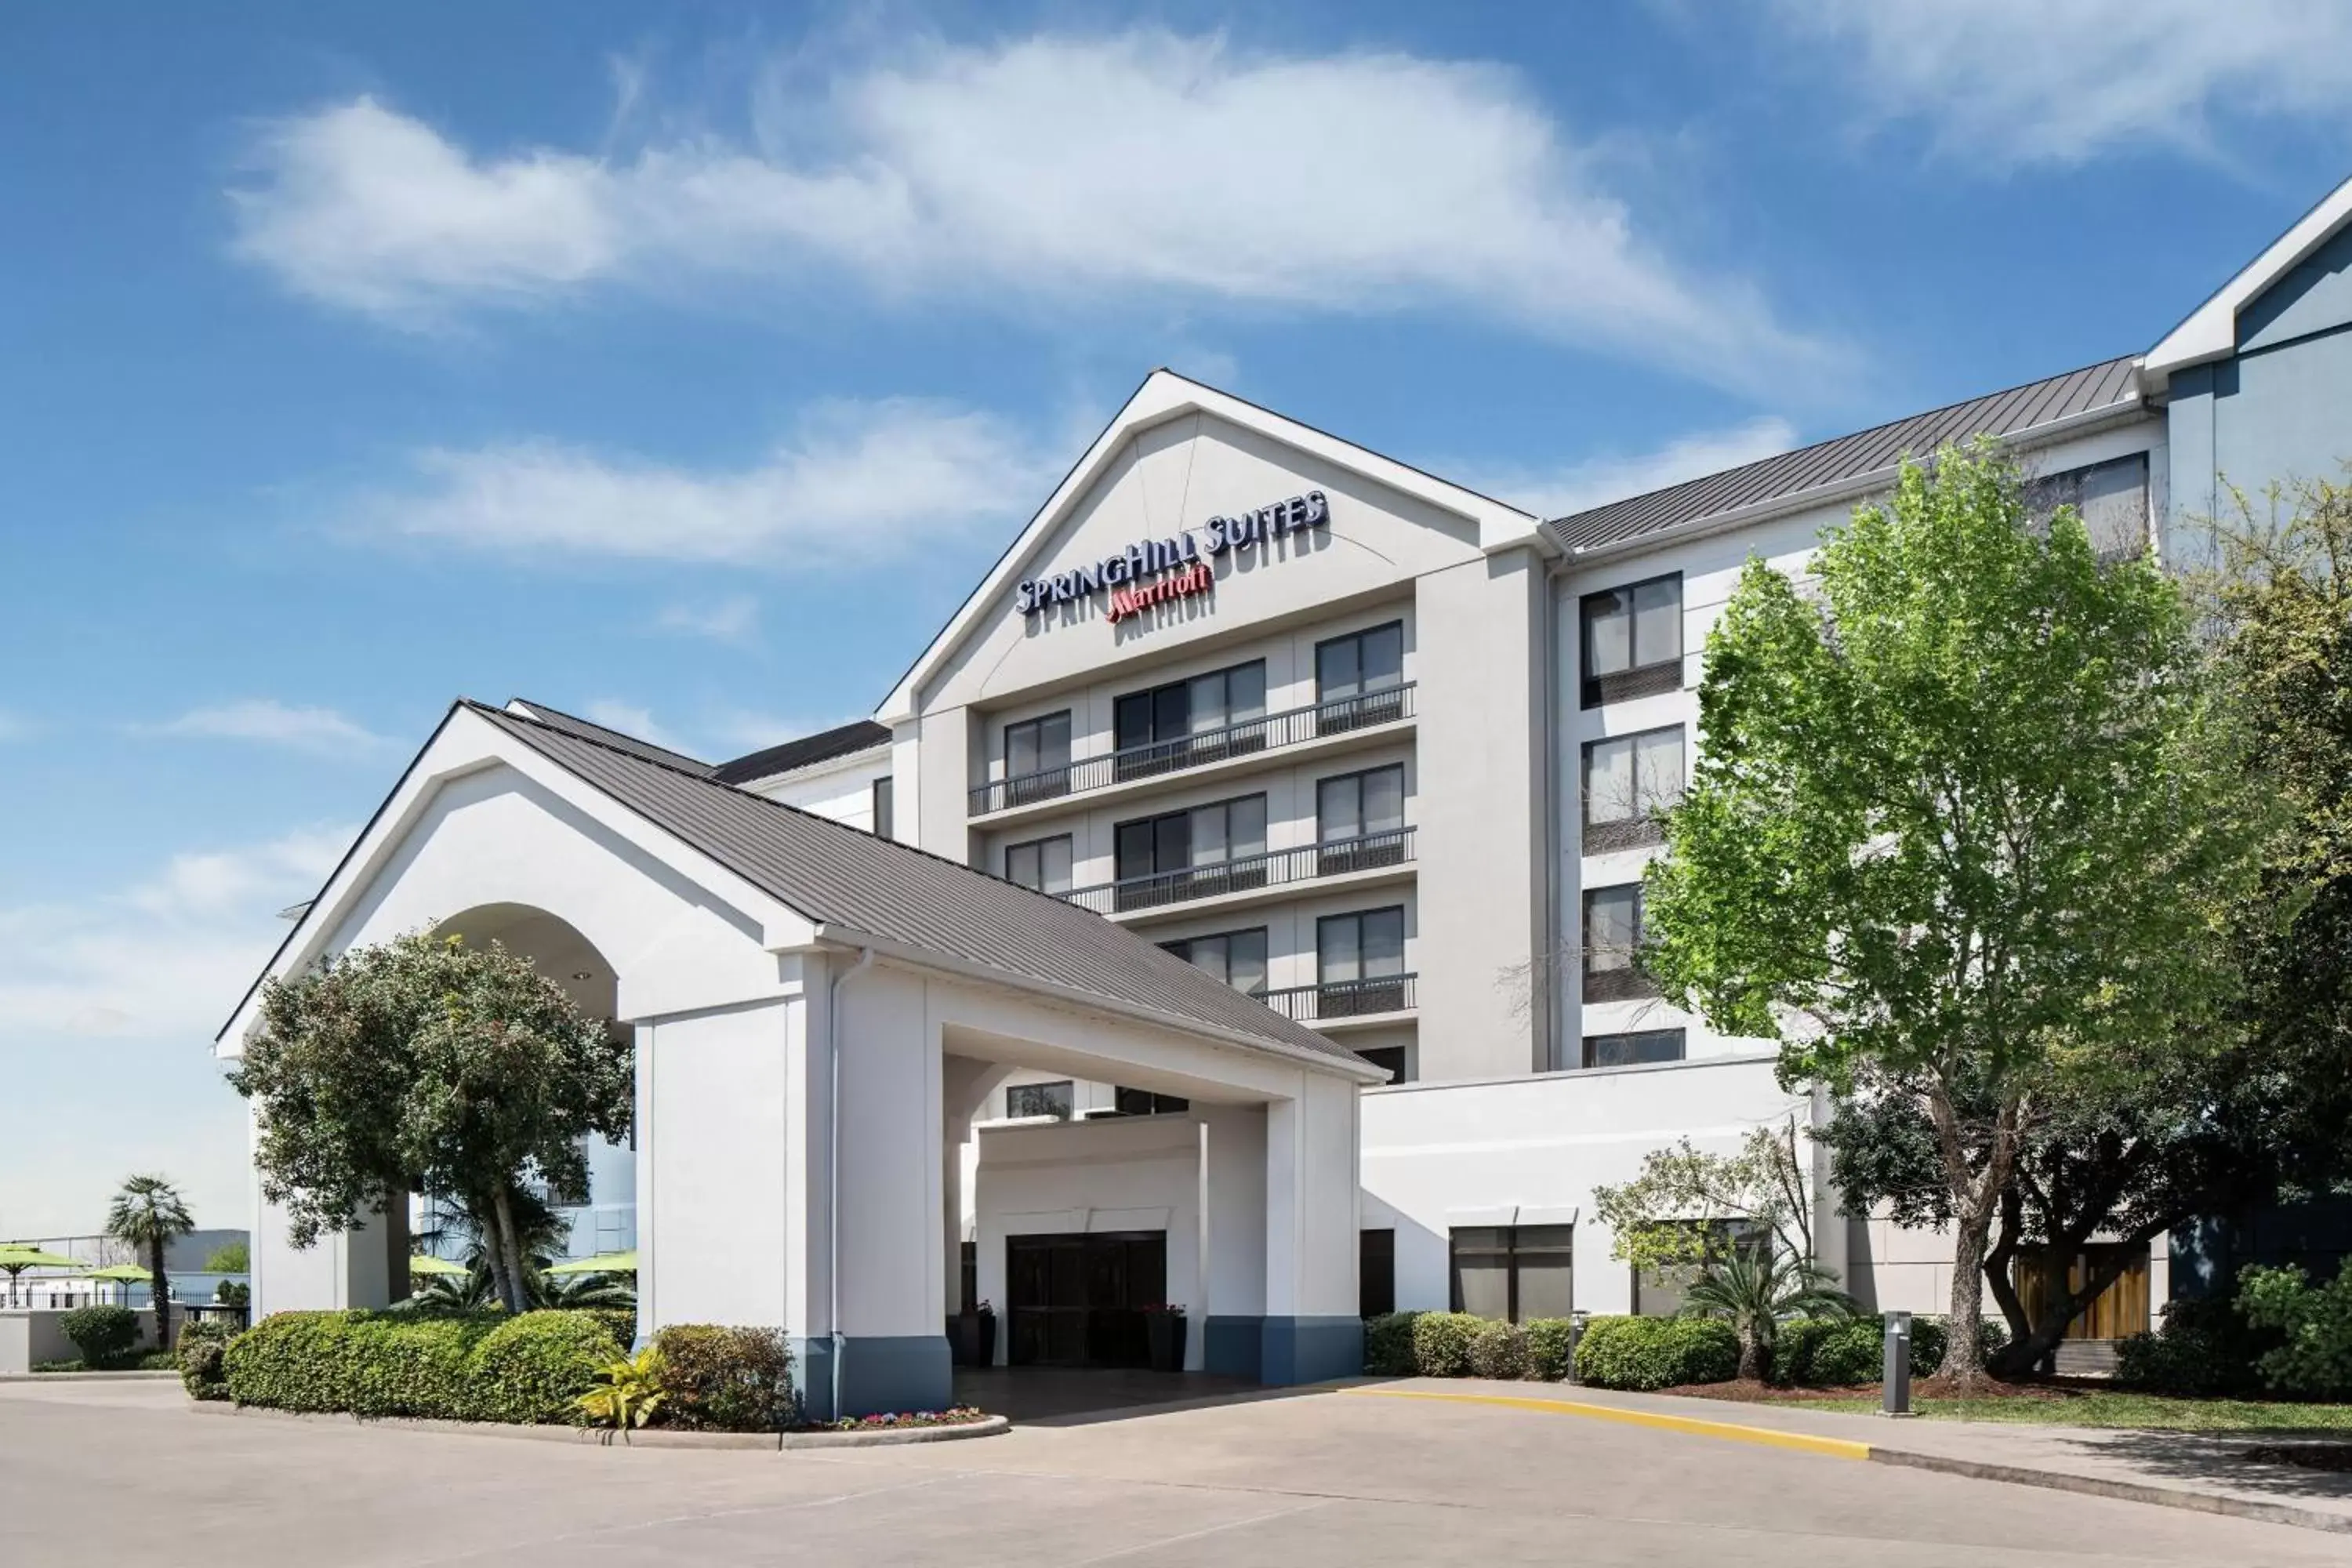 Property Building in SpringHill Suites Houston Hobby Airport